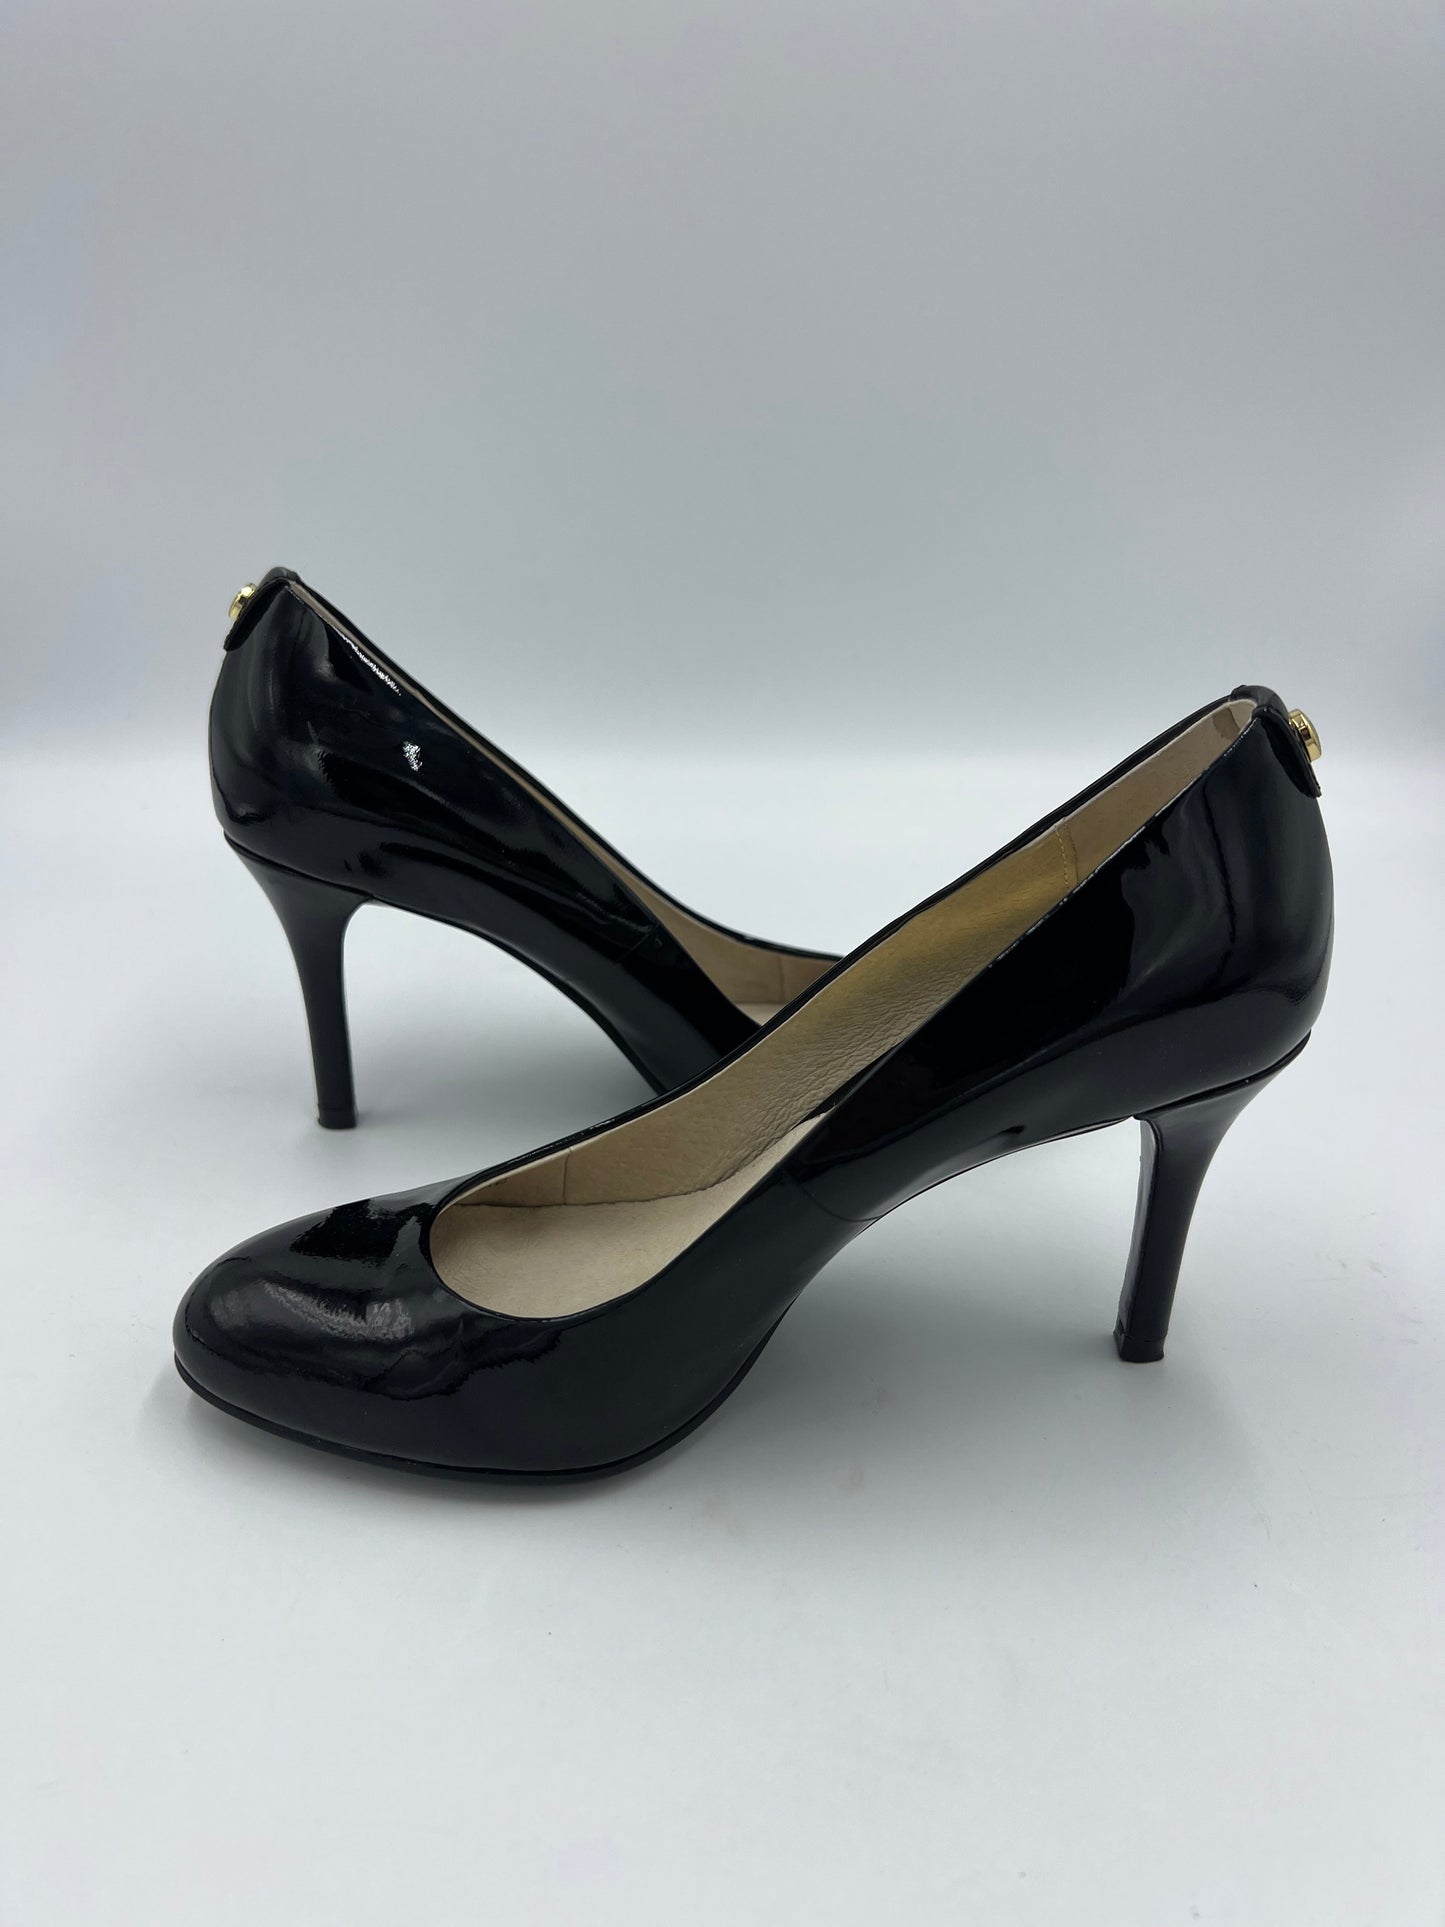 Like New! Shoes Heels Stiletto By Michael Kors  Size: 5